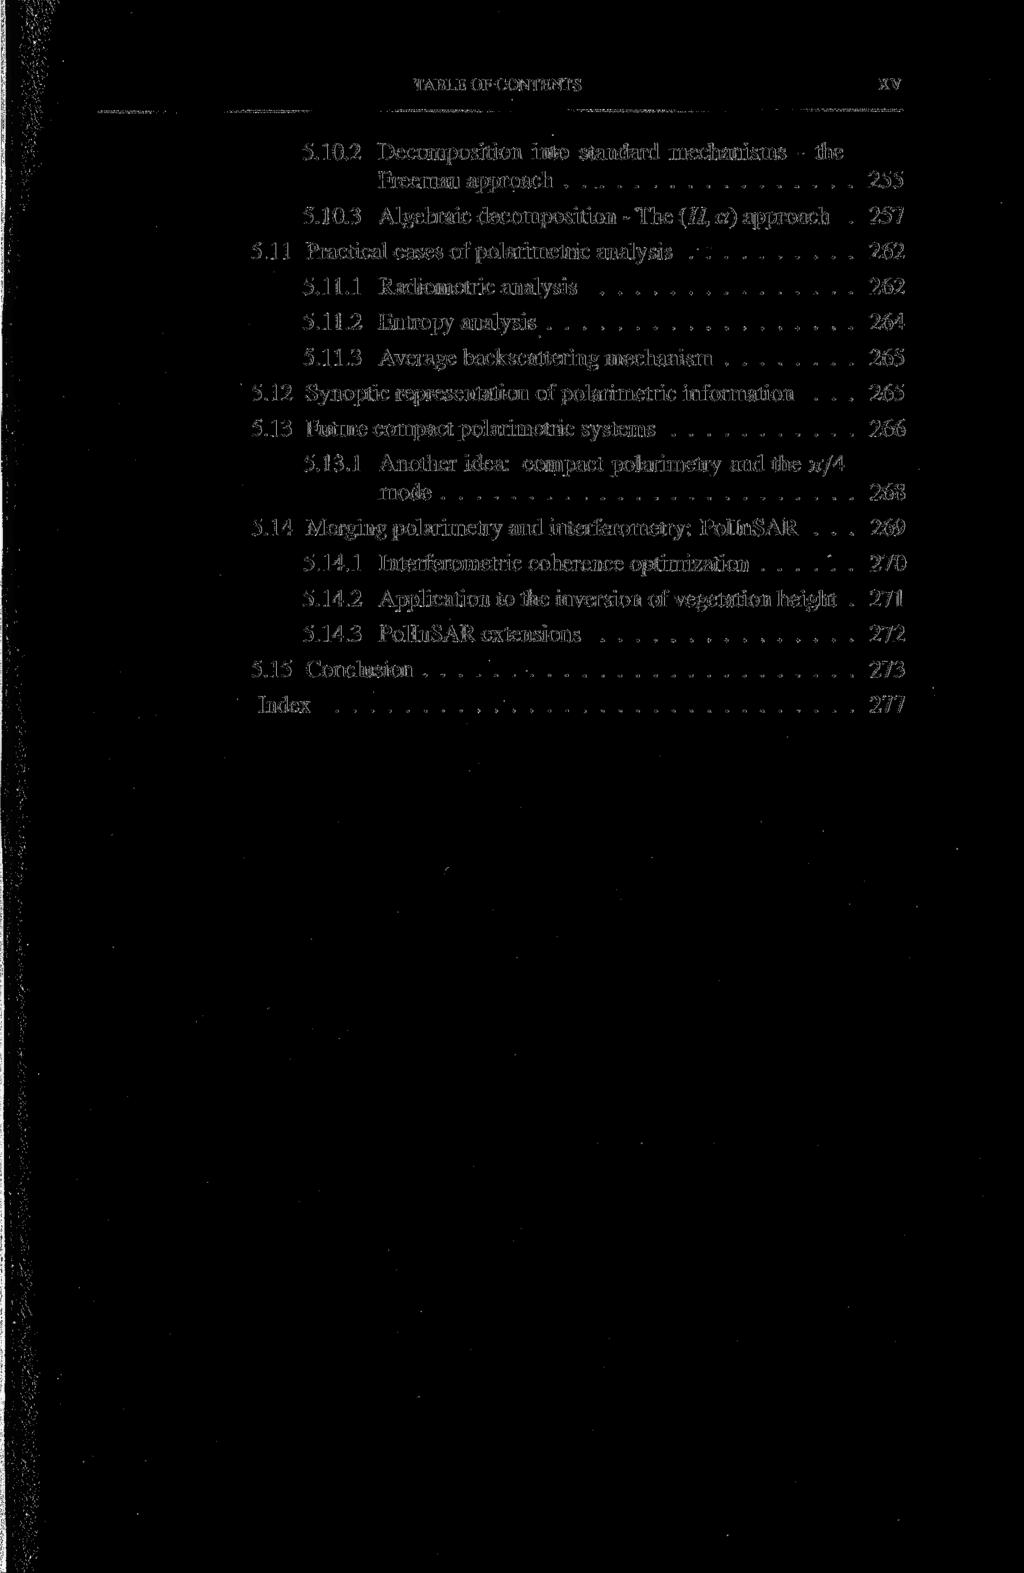 TABLE OF CONTENTS XV 5.10.2 Decomposition into standard mechanisms - the Freeman approach 255 5.10.3 Algebraic decomposition - The (H, a) approach. 257 5.